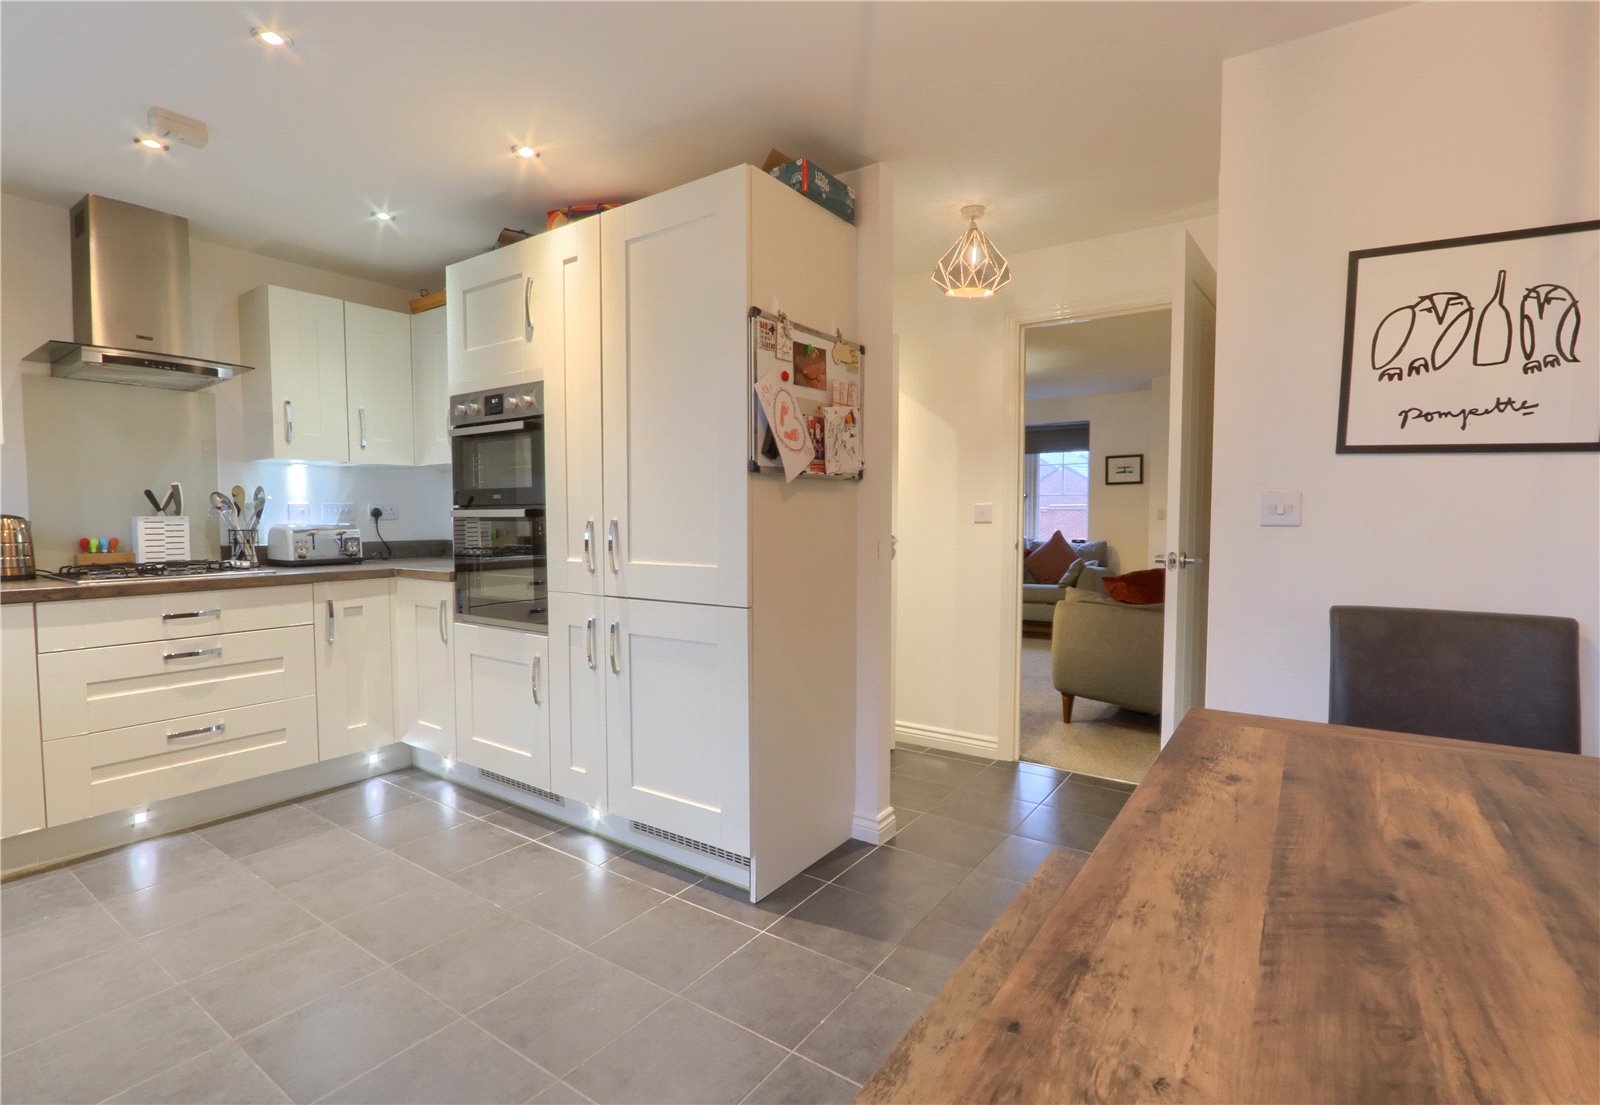 3 bed house for sale in Pennyman Close, Saltburn-by-the-Sea 2